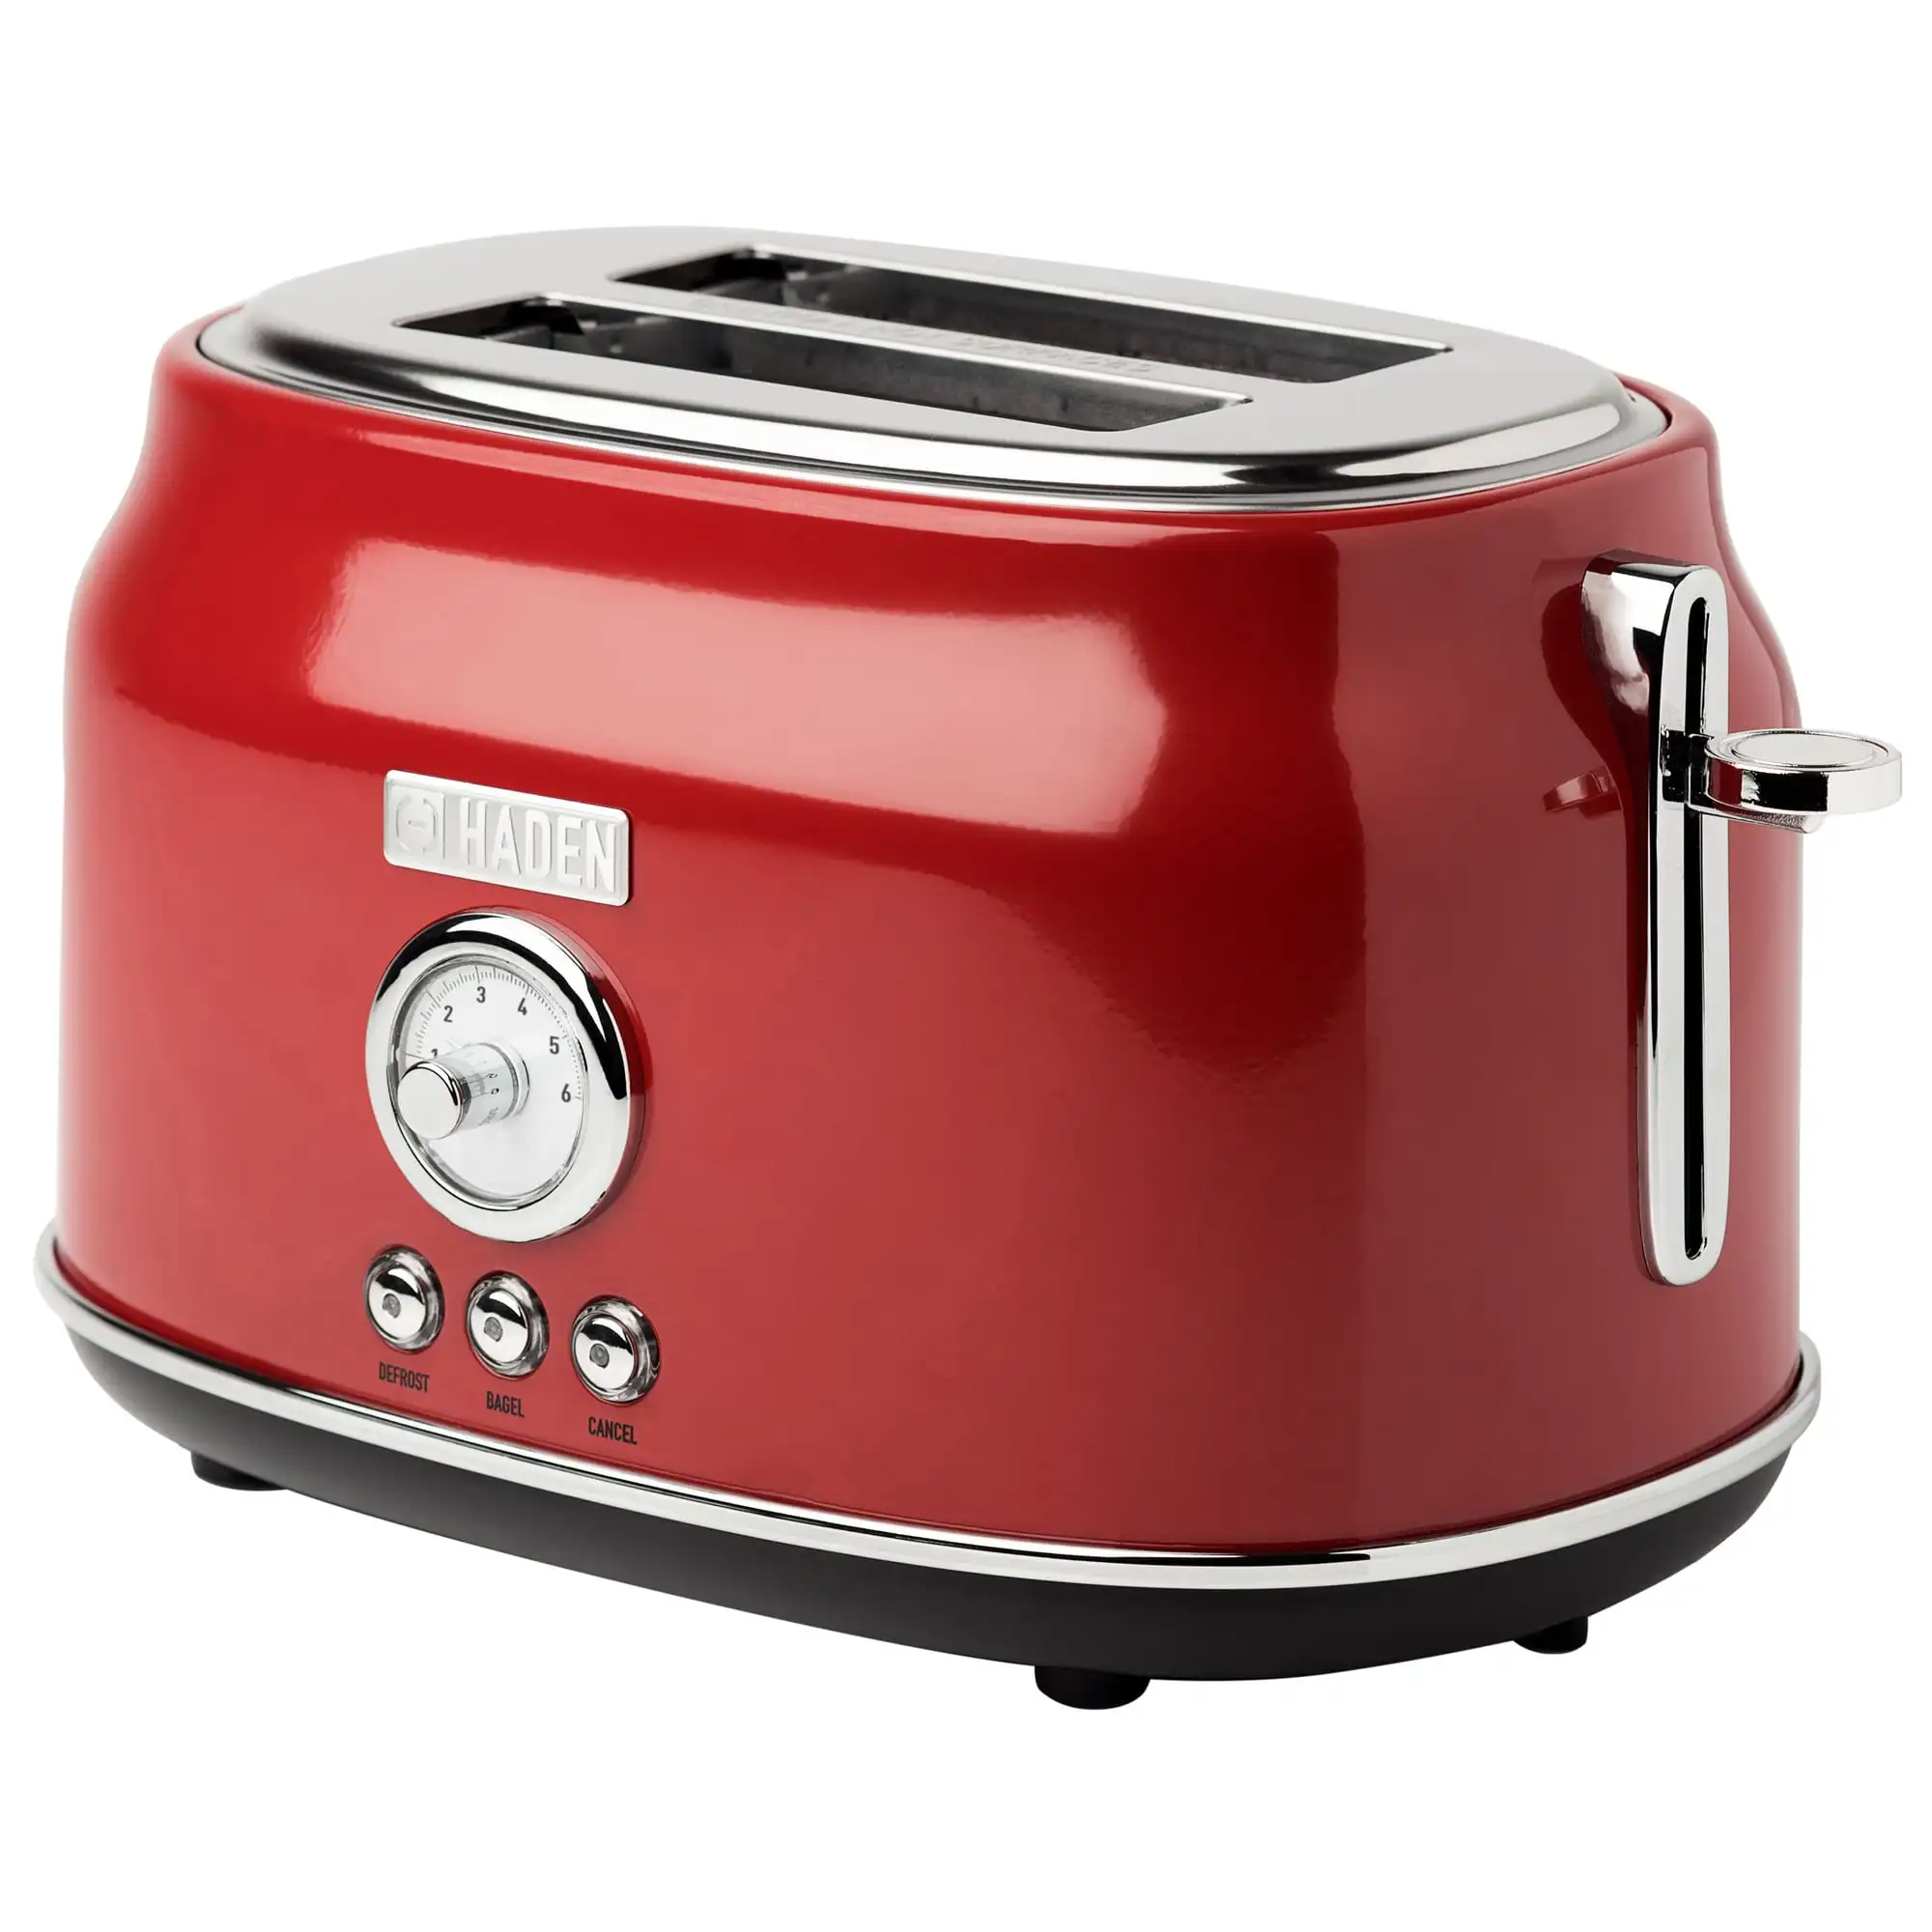 Fast shipping Dorset 2-Slice Wide Slot Stainless Steel Countertop Retro Toaster, Red - 75001 kitchen bread grill Toasting Machin